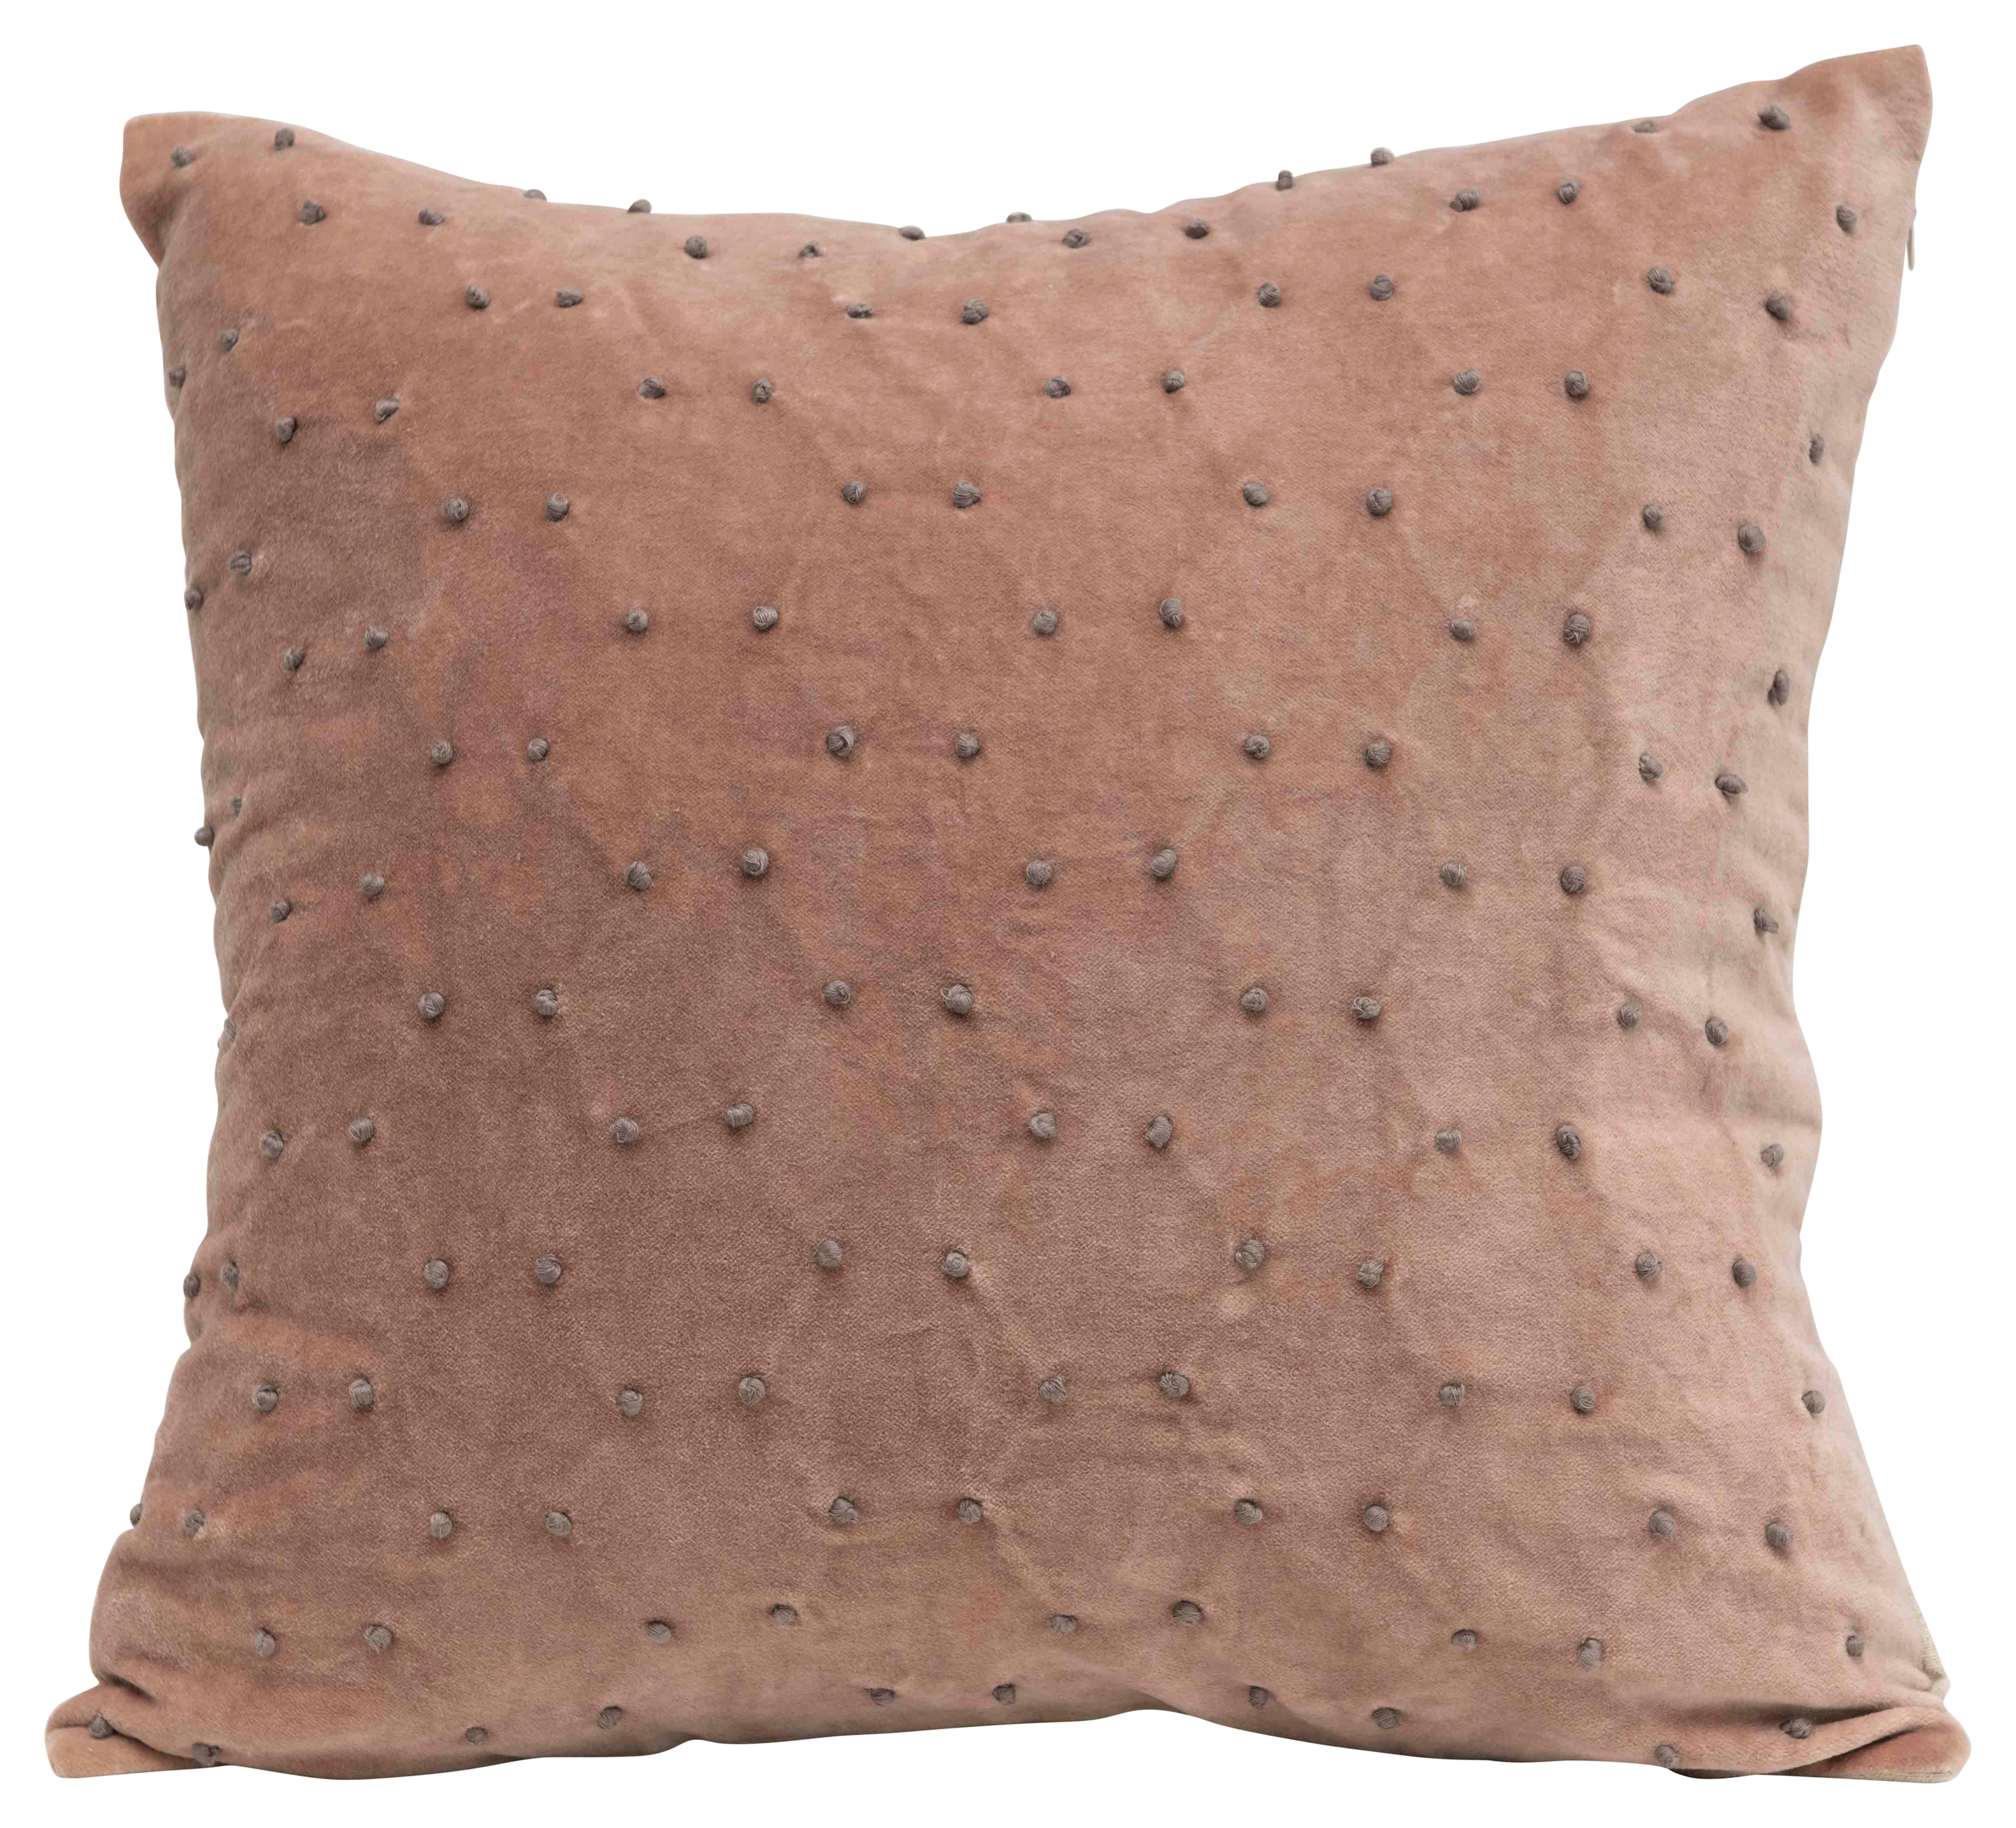 Reversible Square Polka Dot Cotton Velvet Pillow with Solid Back - Nomad Home